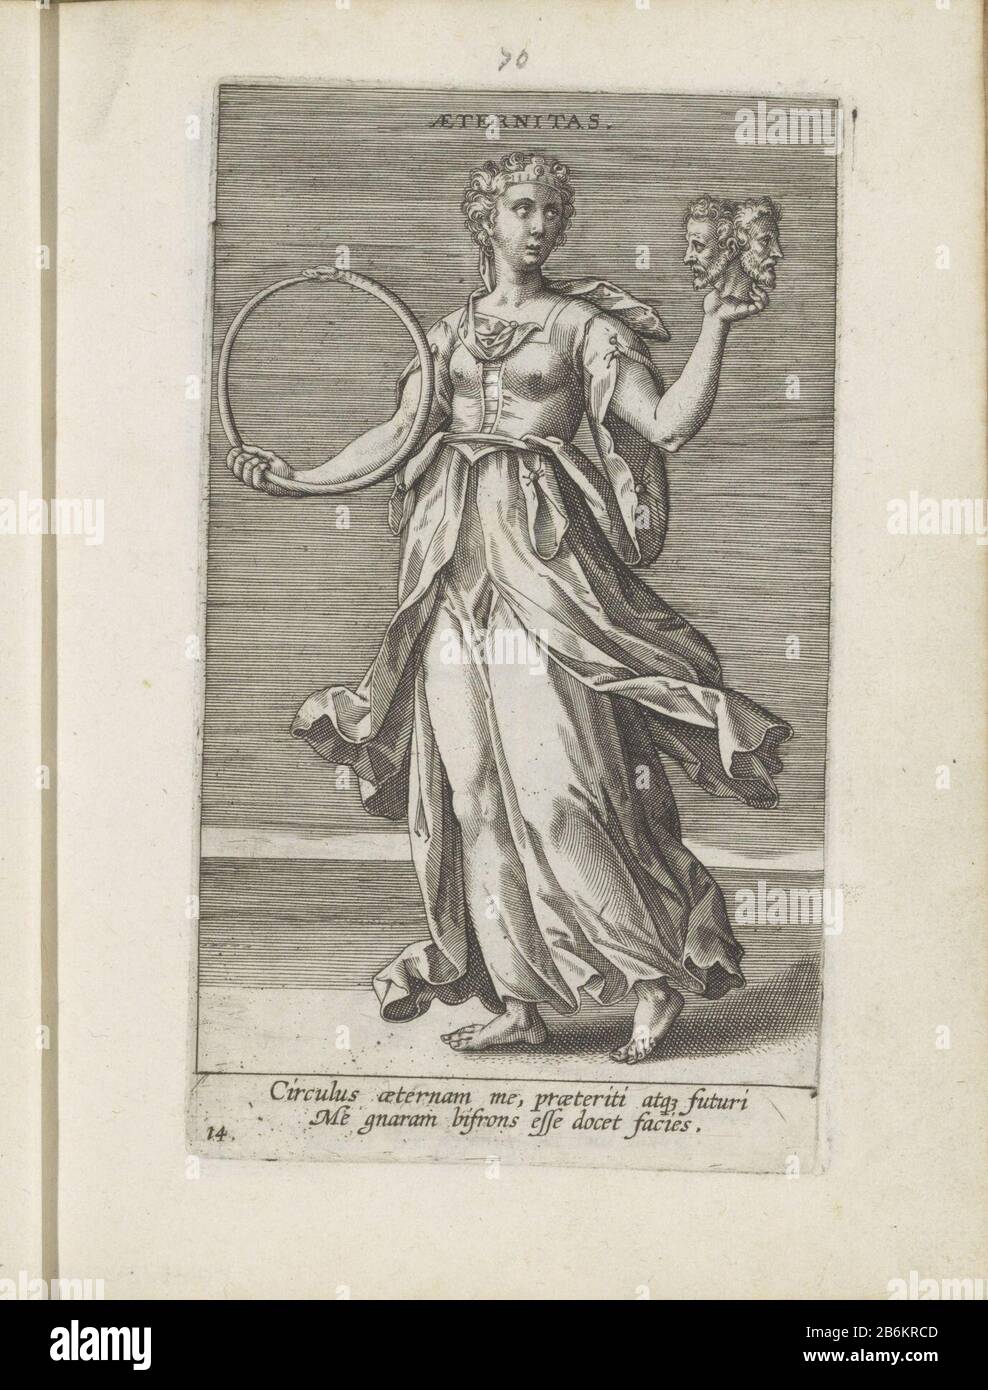 Eeuwigheid Eternity (titel op object) Prosopographia or virtues, psychological, physical, good foreign vices and varying affections project (serietitel) woman standing with her left hand and two heads in her right an Ouroboros, a snake biting its tail. This symbolizes eternity. Among the show two lines of text in Latin. The print is part of a album. Manufacturer : printmaker: Philips Gall Writer: Cornelis KiliaanPlaats manufacture: printmaker: Antwerp Writer: Southern Netherlands Date: ca. 1585 - ca. 1590 Physical features: car material: paper Technique: engra (printing process) Dimensions: pl Stock Photo